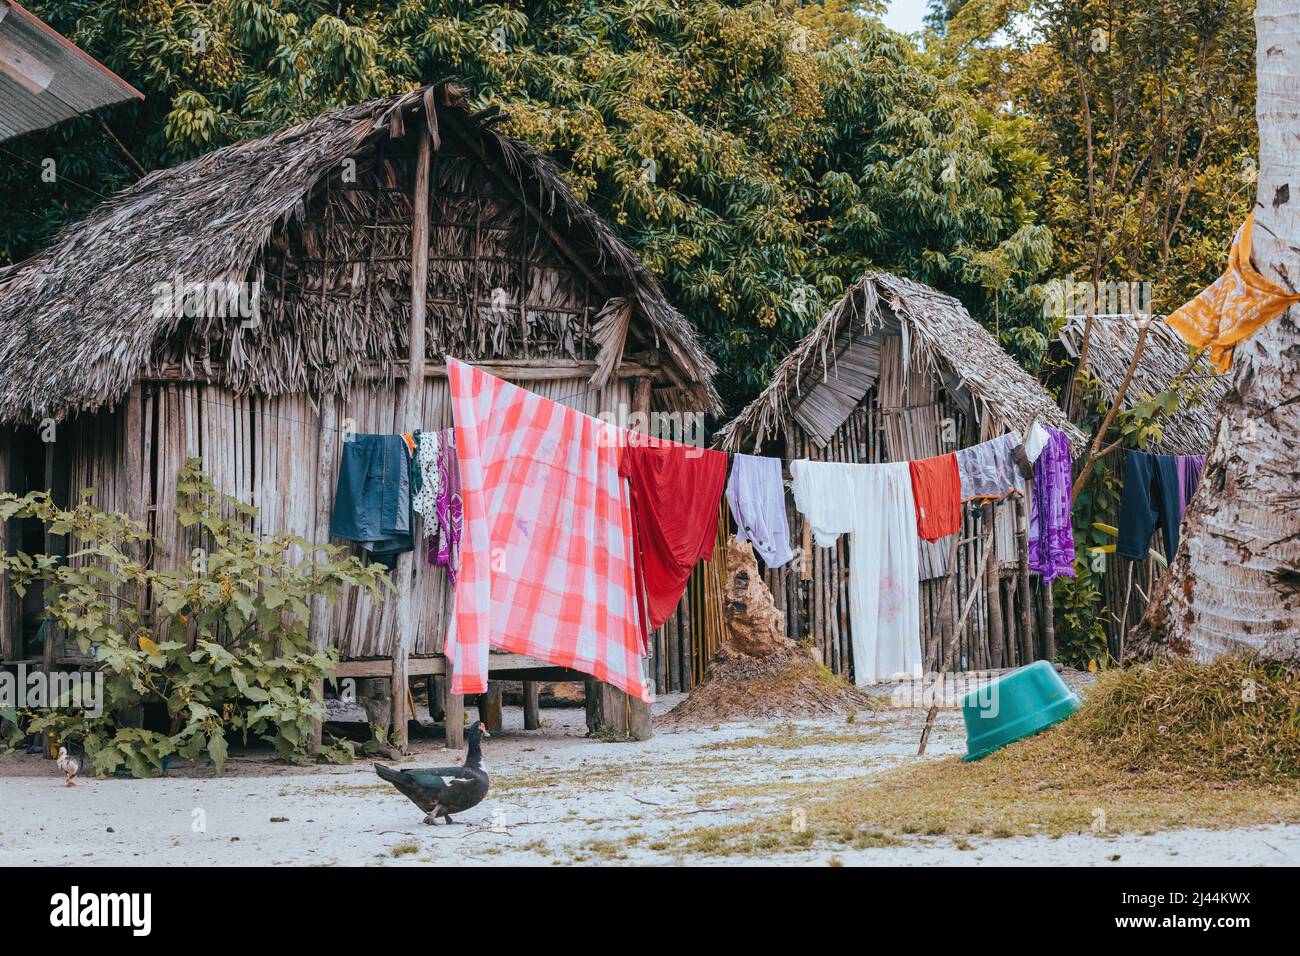 Laundry day in small village in Masoala, freshly washed laundry hanging on a string next to a shack. Maroantsetra, Madagascar Stock Photo